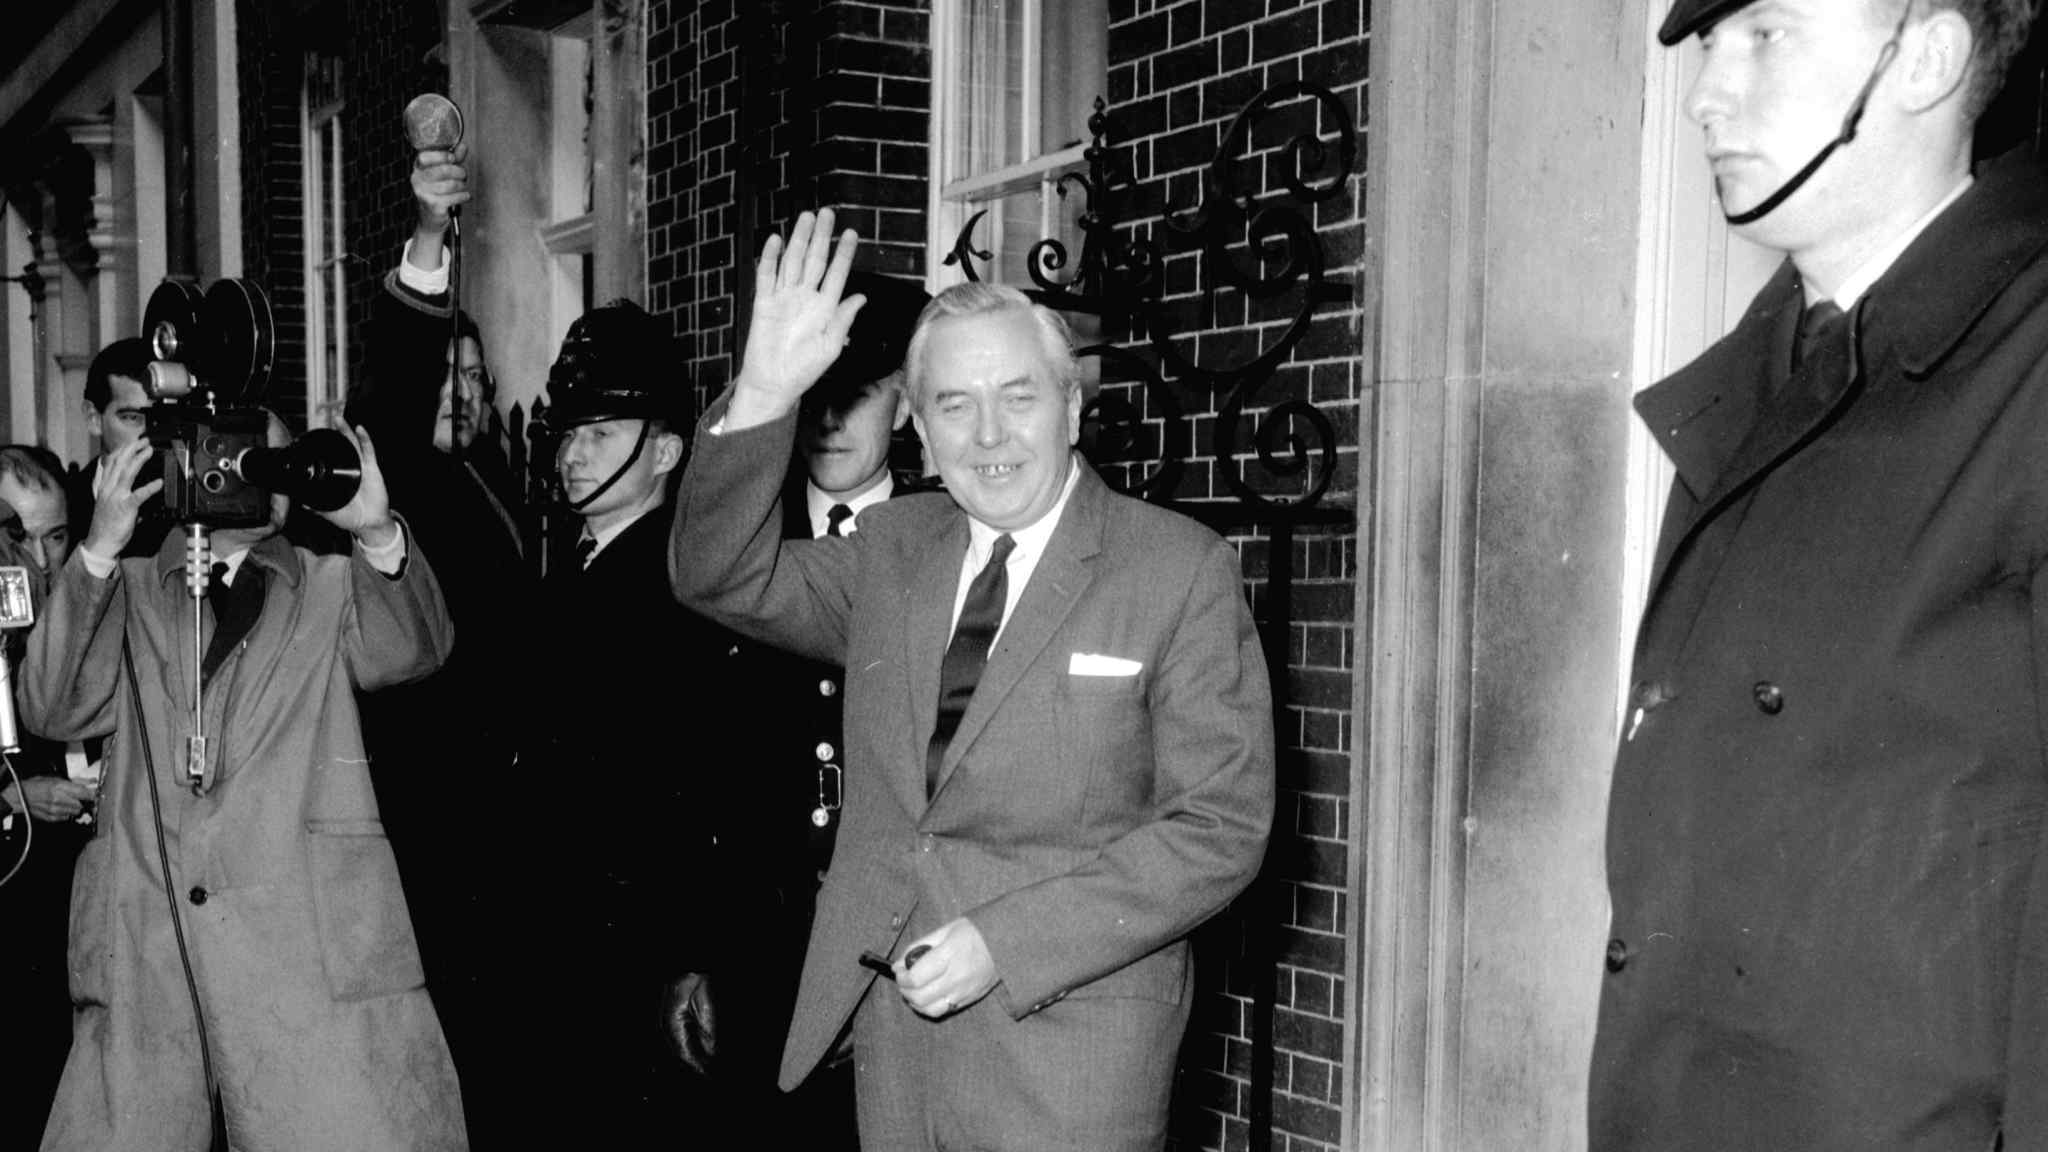 Harold Wilson’s victories — a lesson about winning